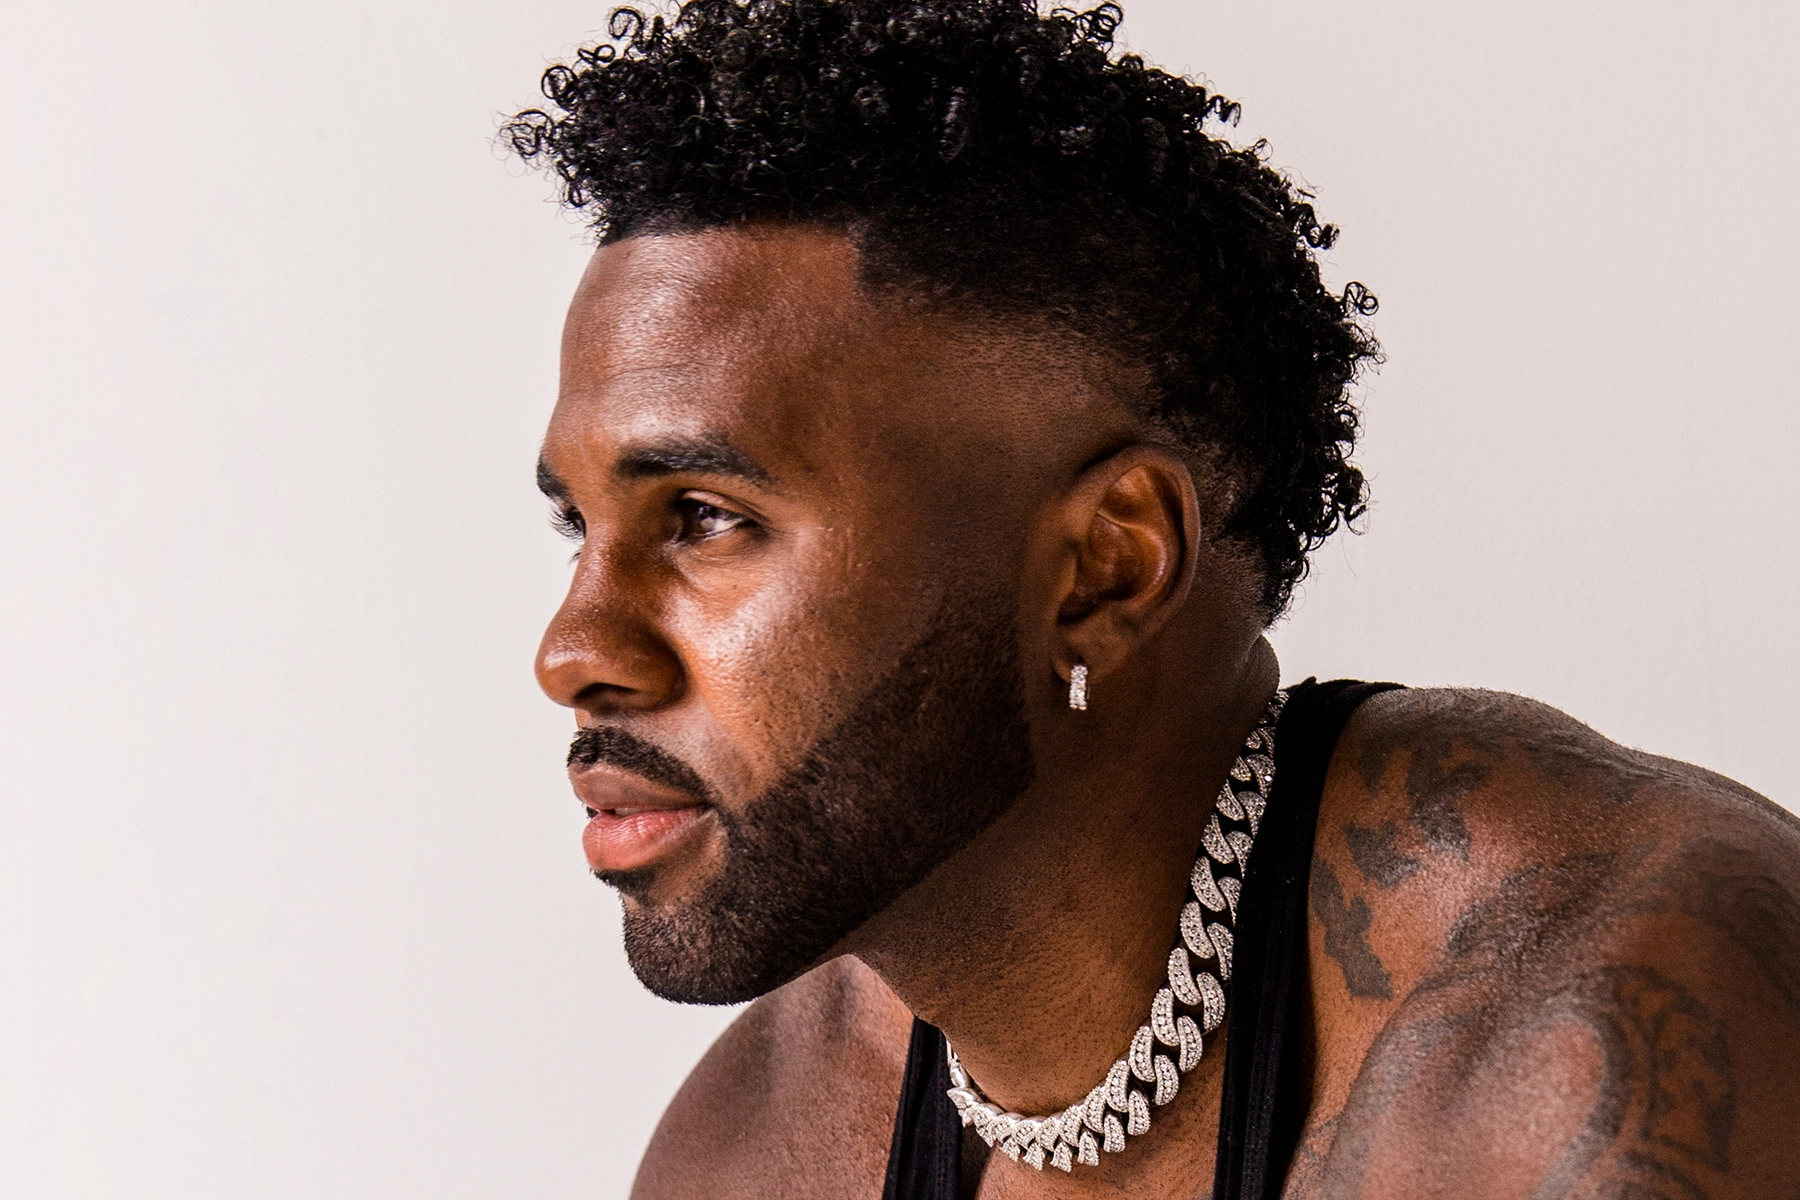 The Journey Of Jason Derulo - From Being A Pop Star To Worldwide Famous